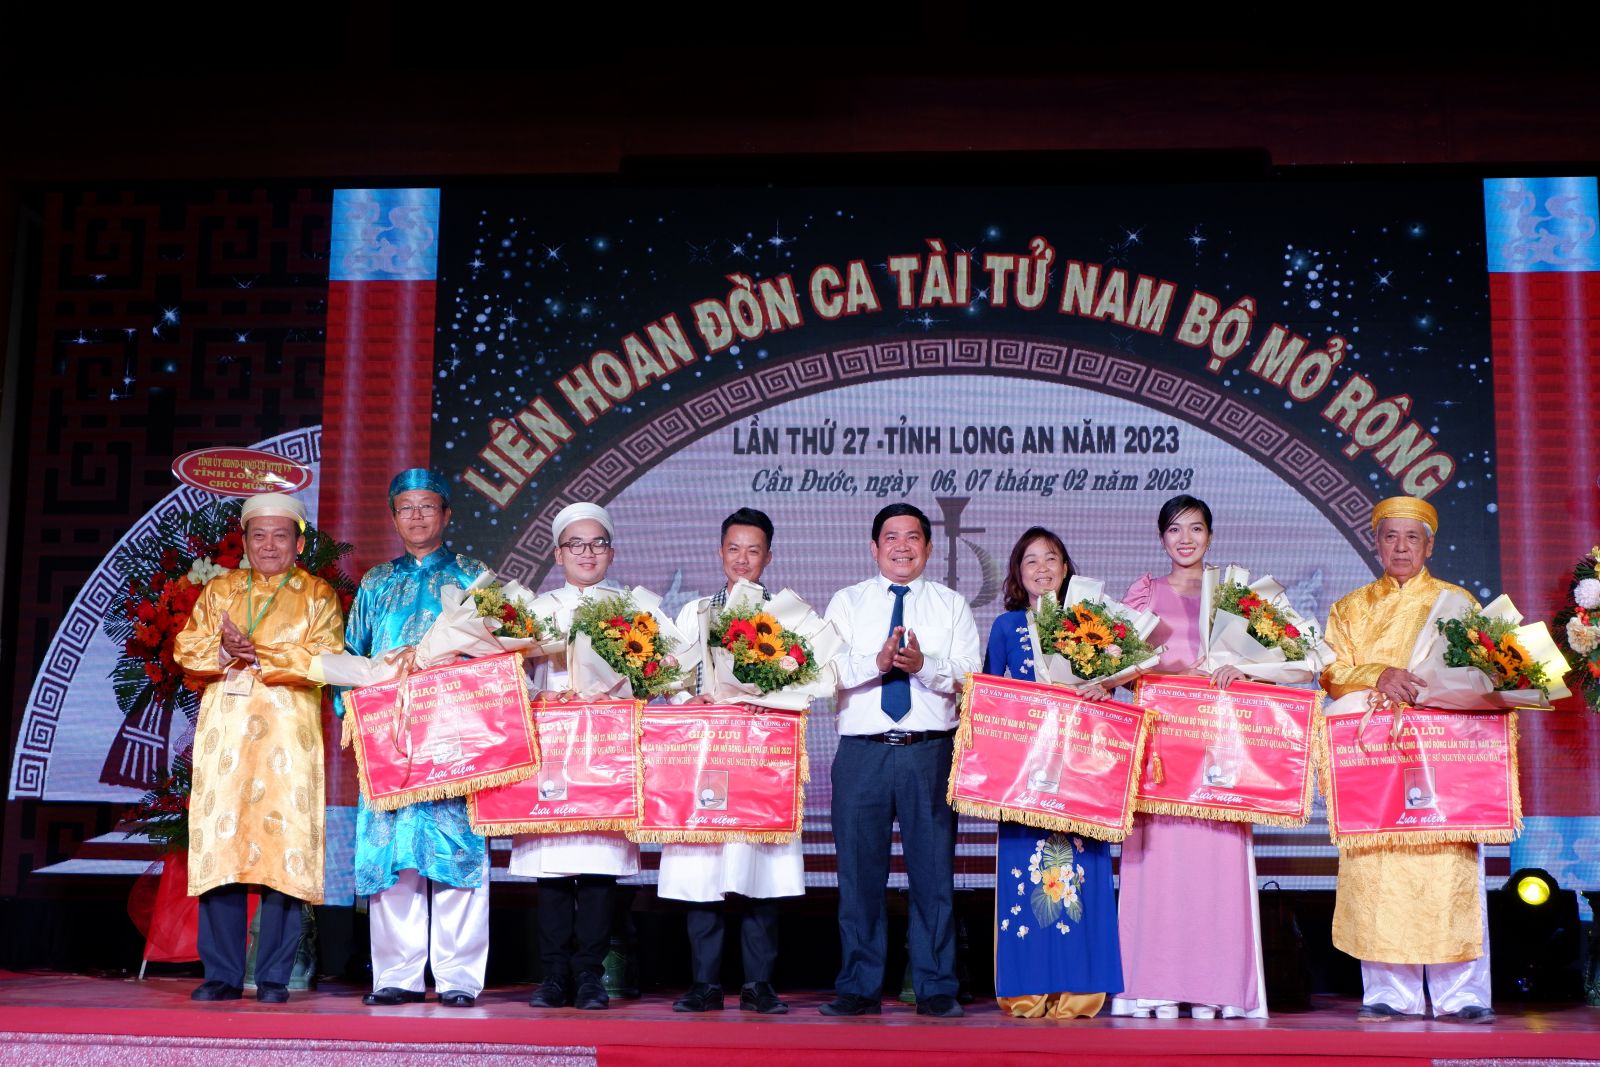 Opening ceremony of Long An Don Ca Tai Tu Festival 2023